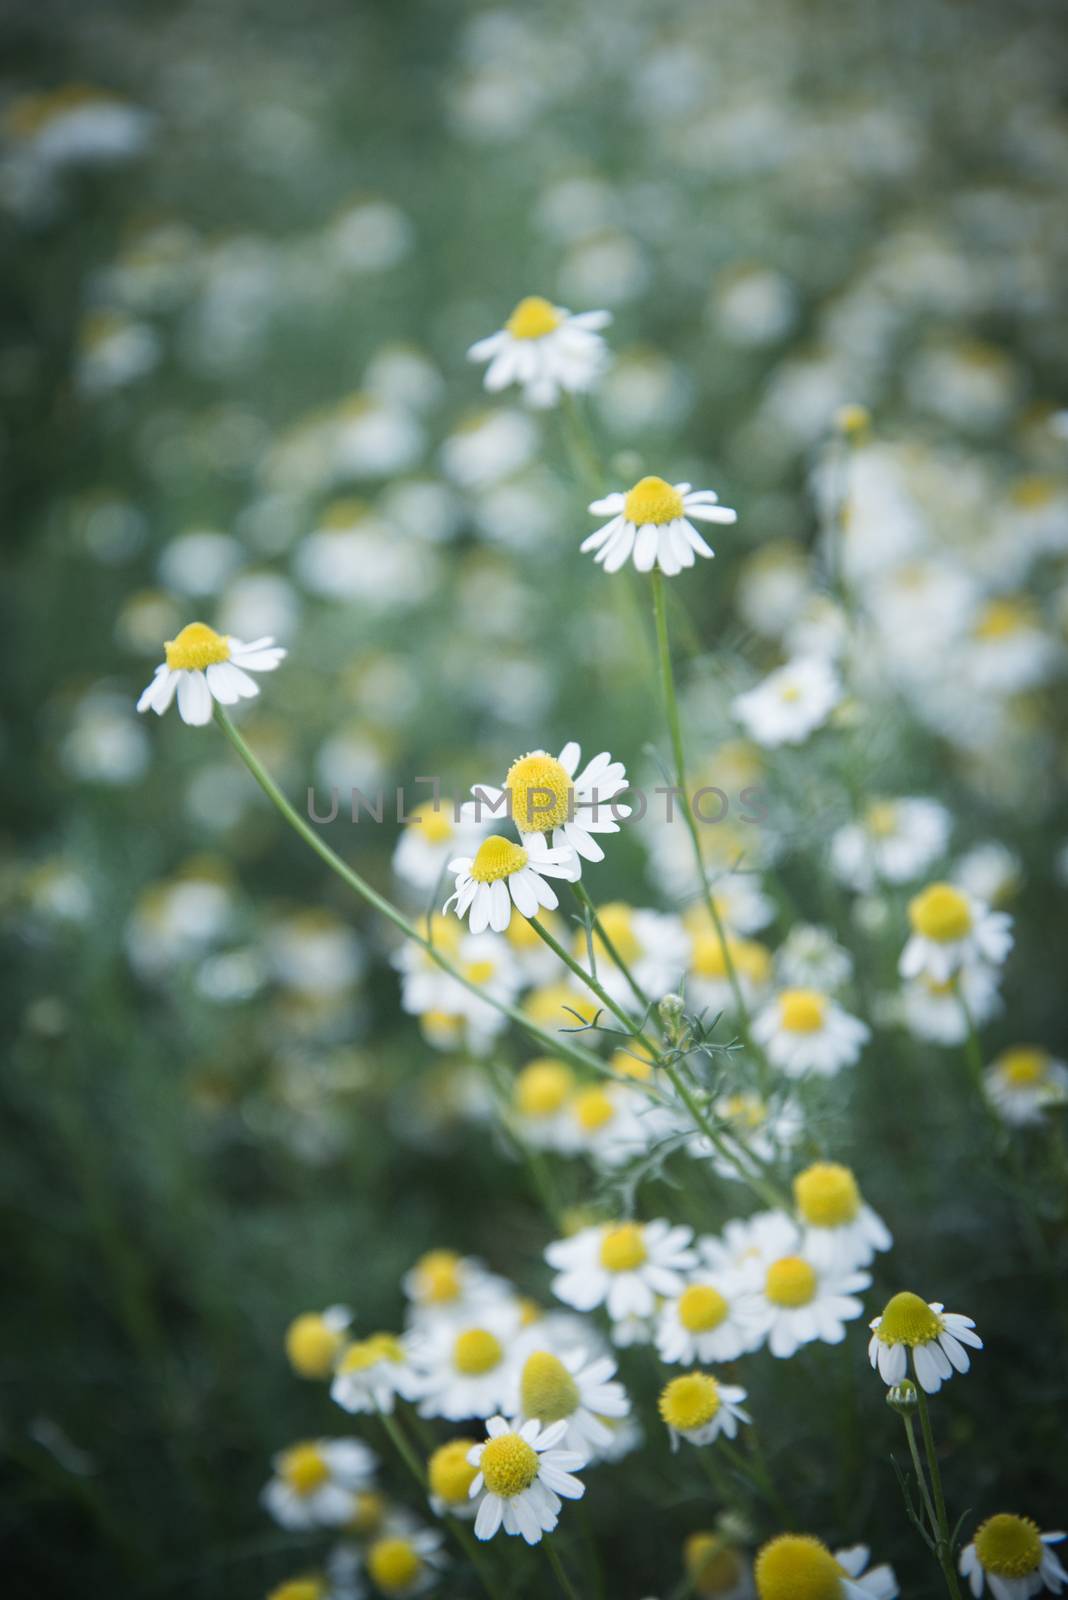 An image of a beautiful daisy flowers  Filtered Images by jakgree